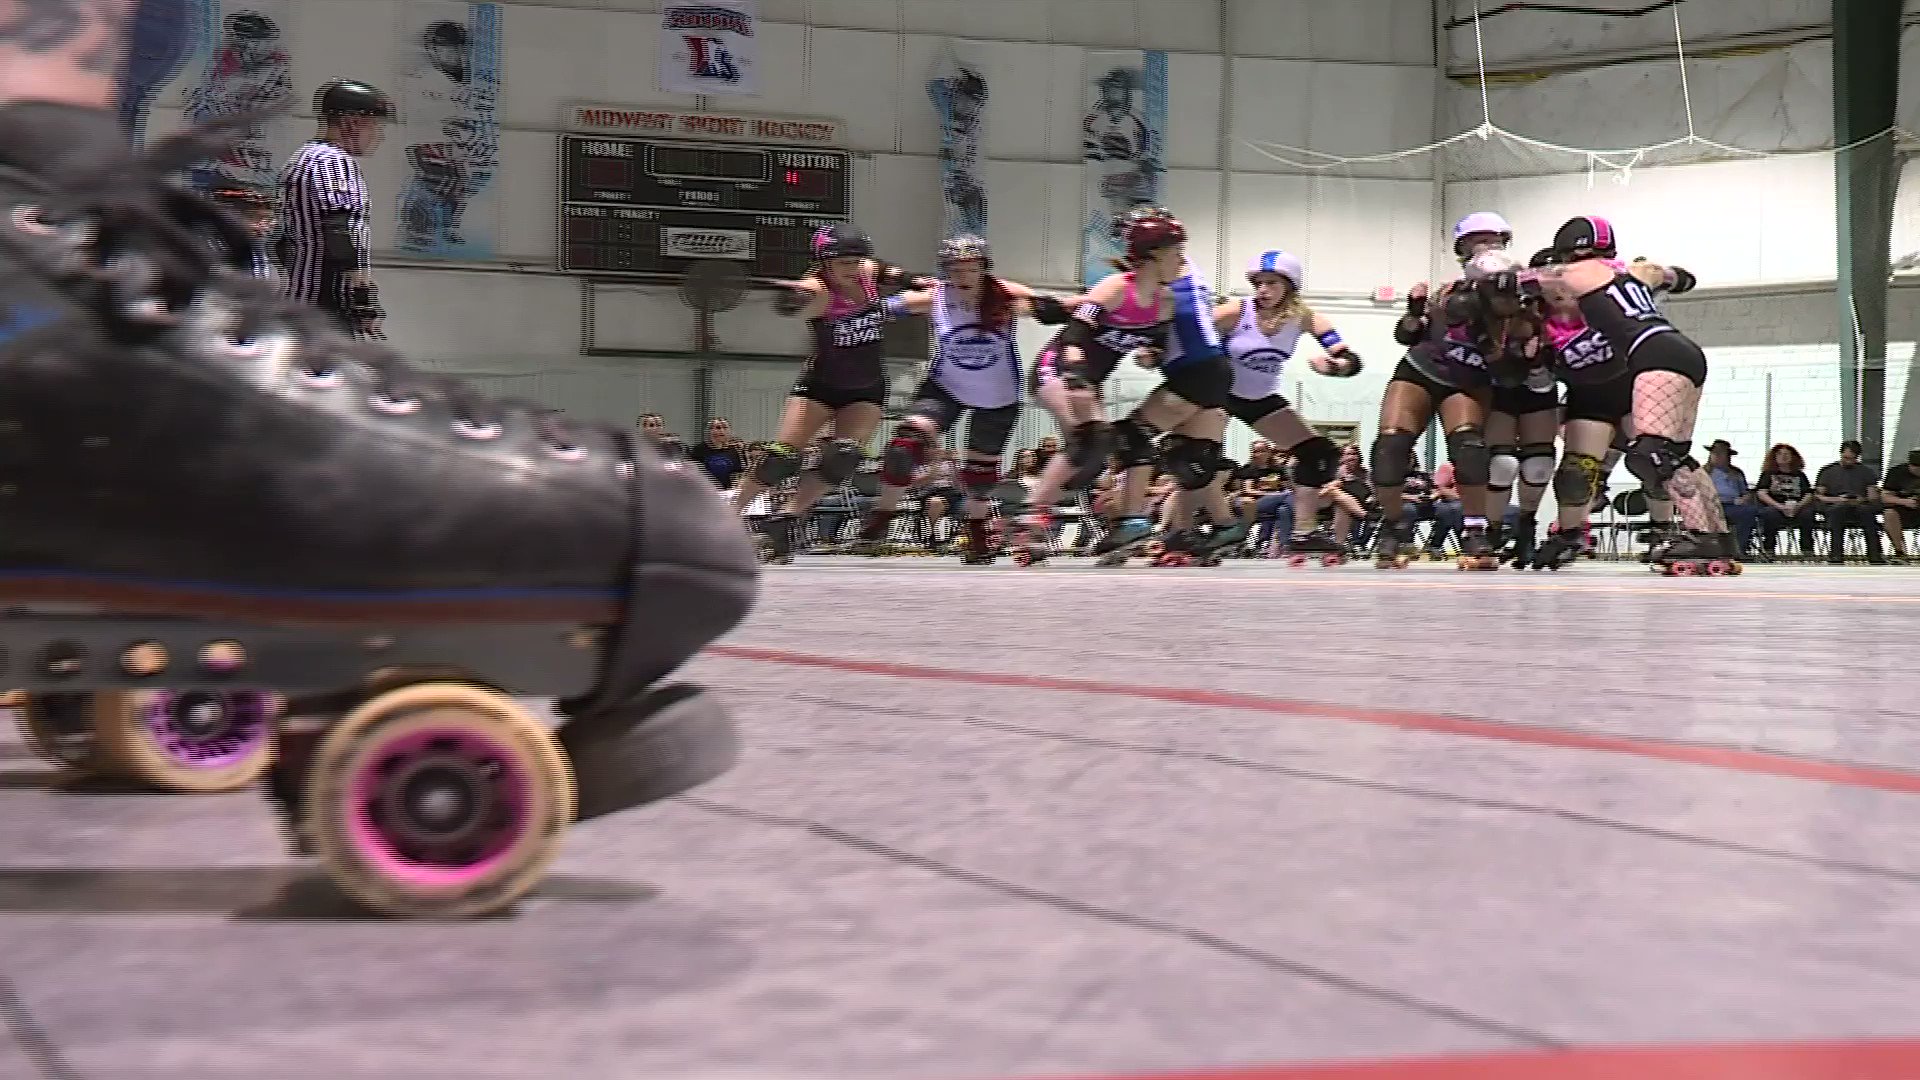 Arch rival roller derby on next event june advance discounted tix on sale now httpstcouxuitmrte